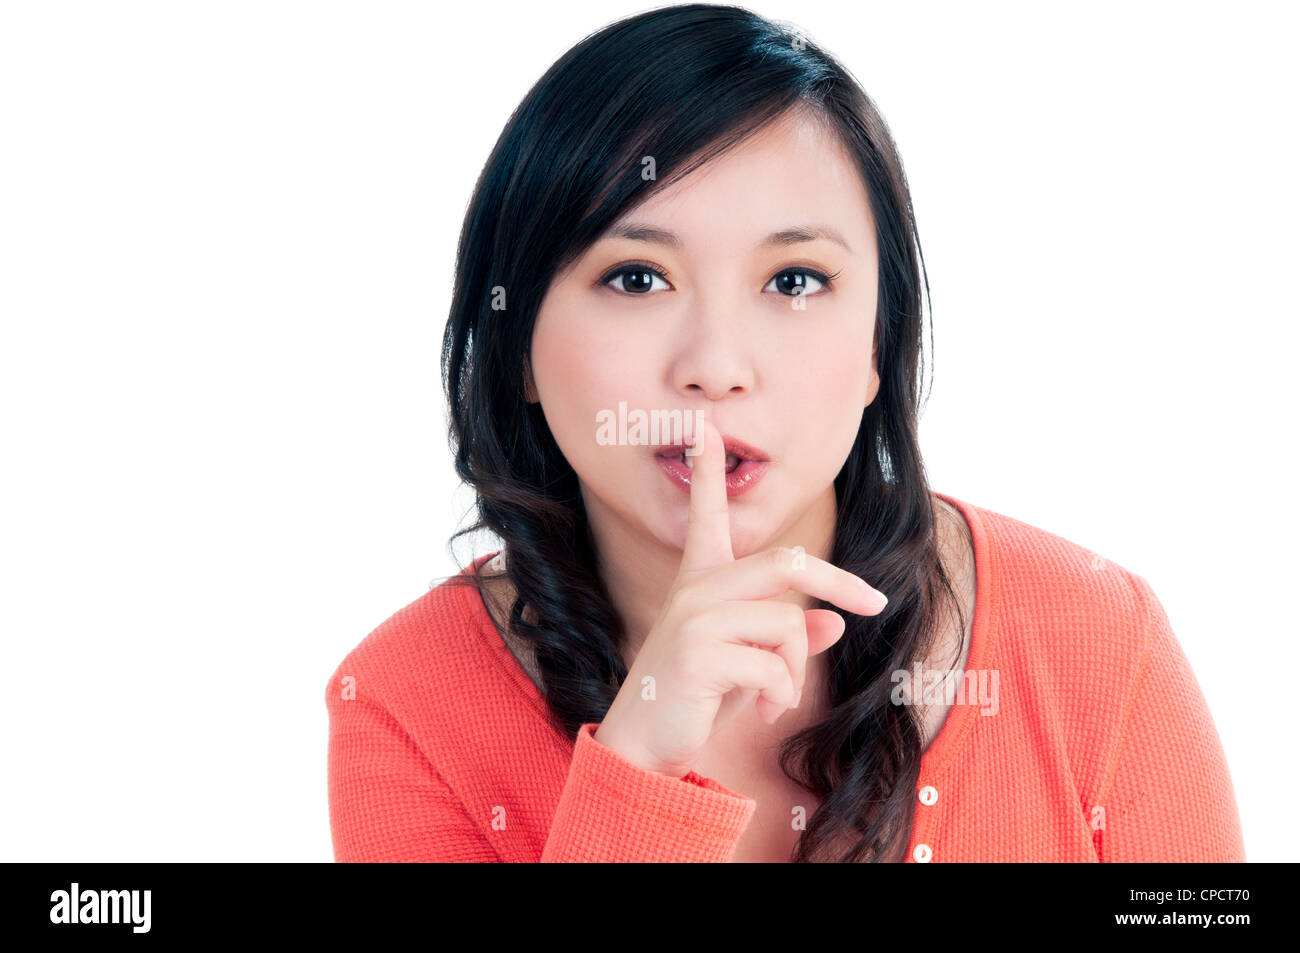 Attractive young woman showing finger over her lips Stock Photo